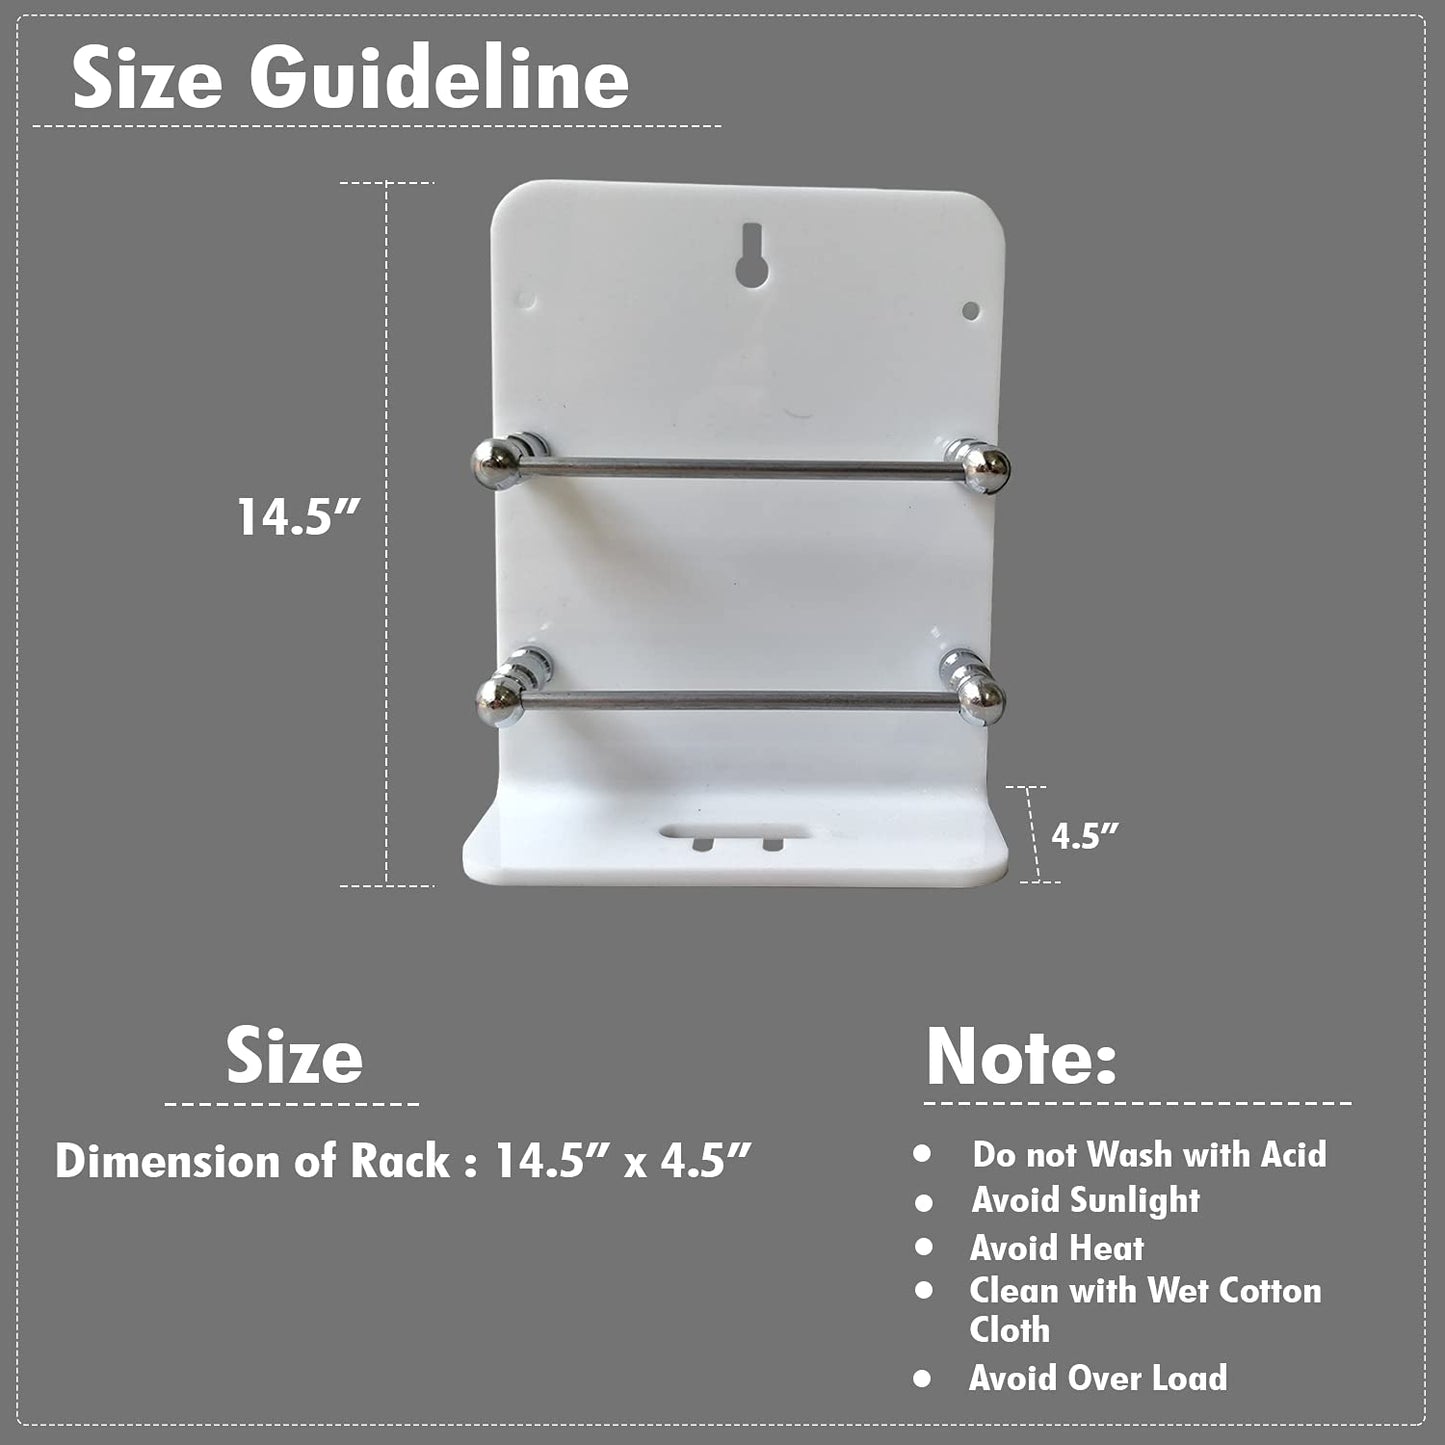 Acrylic Wall Mounted Mobile Stand with Data Cable Receiving Hole